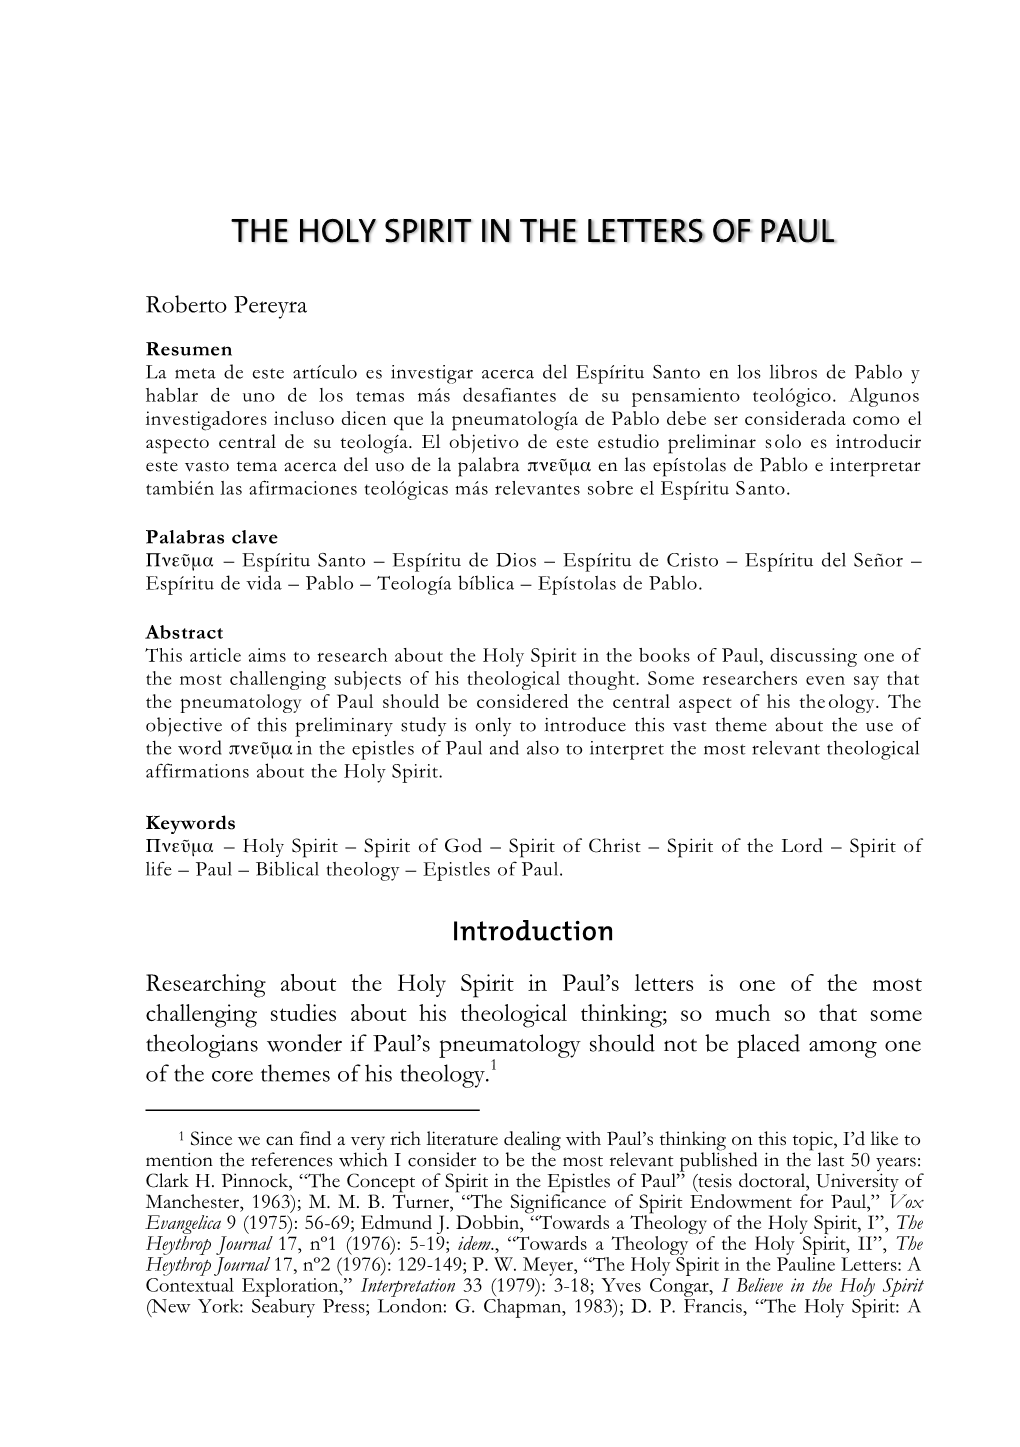 The Holy Spirit in the Letters of Paul